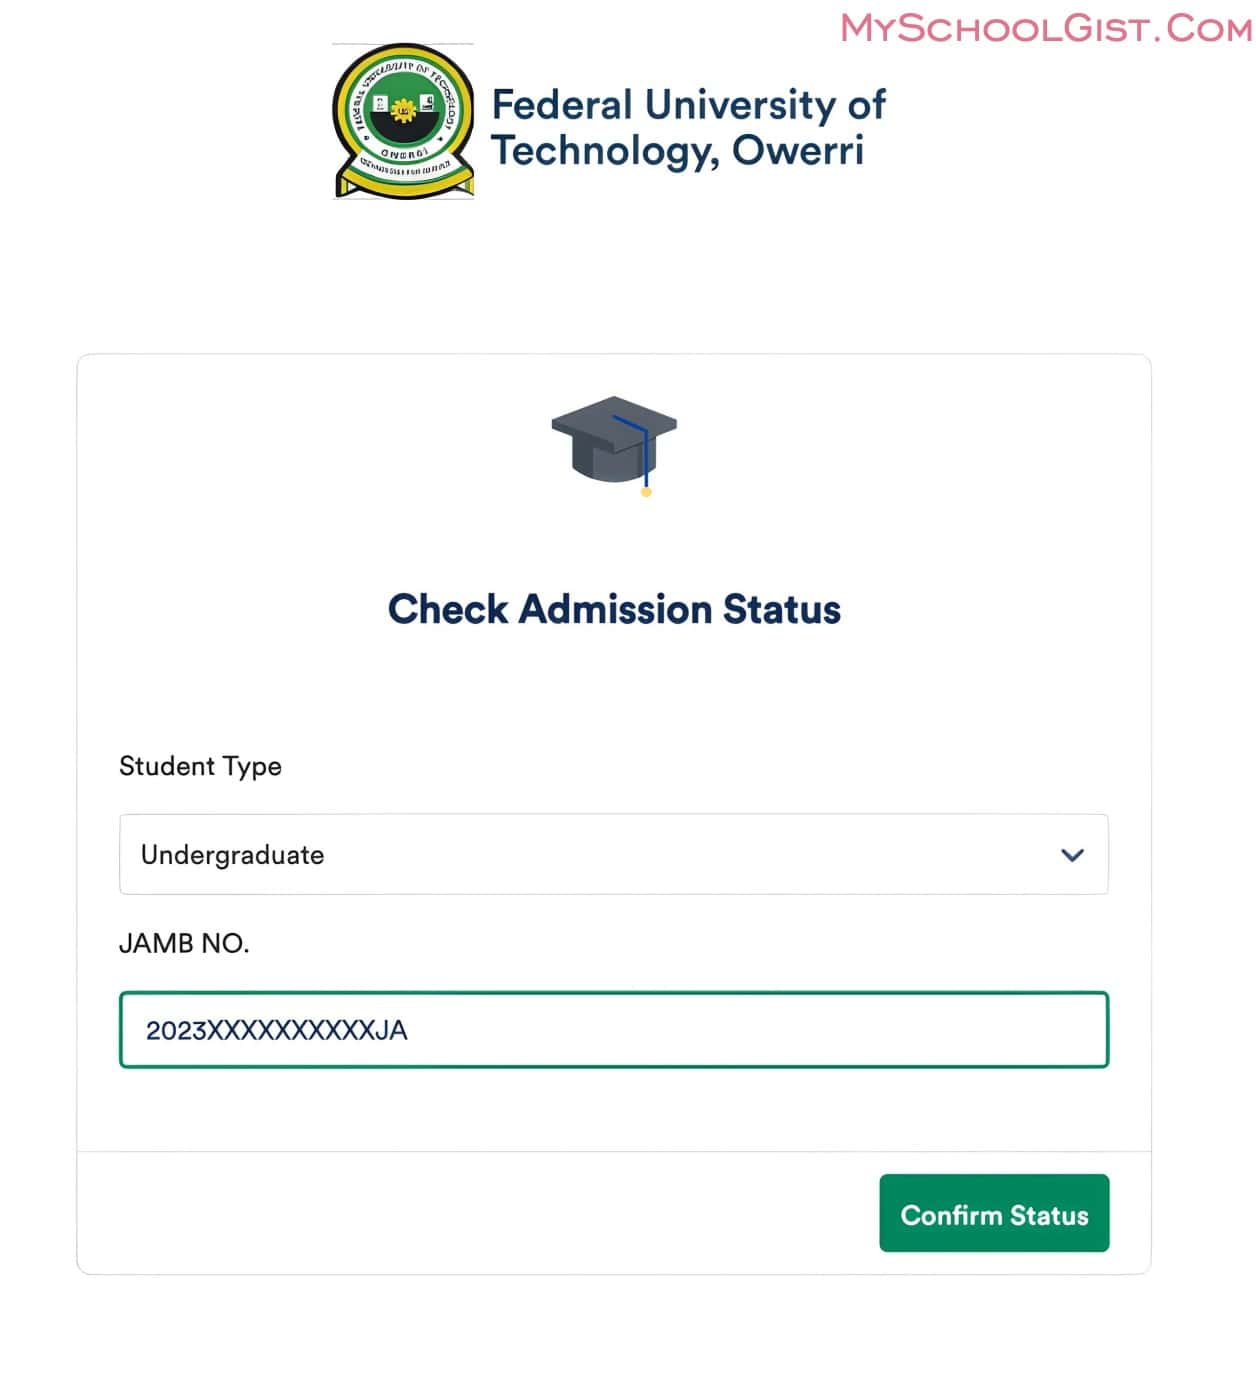 Step-by-Step Guide to Check Your FUTO Admission Status